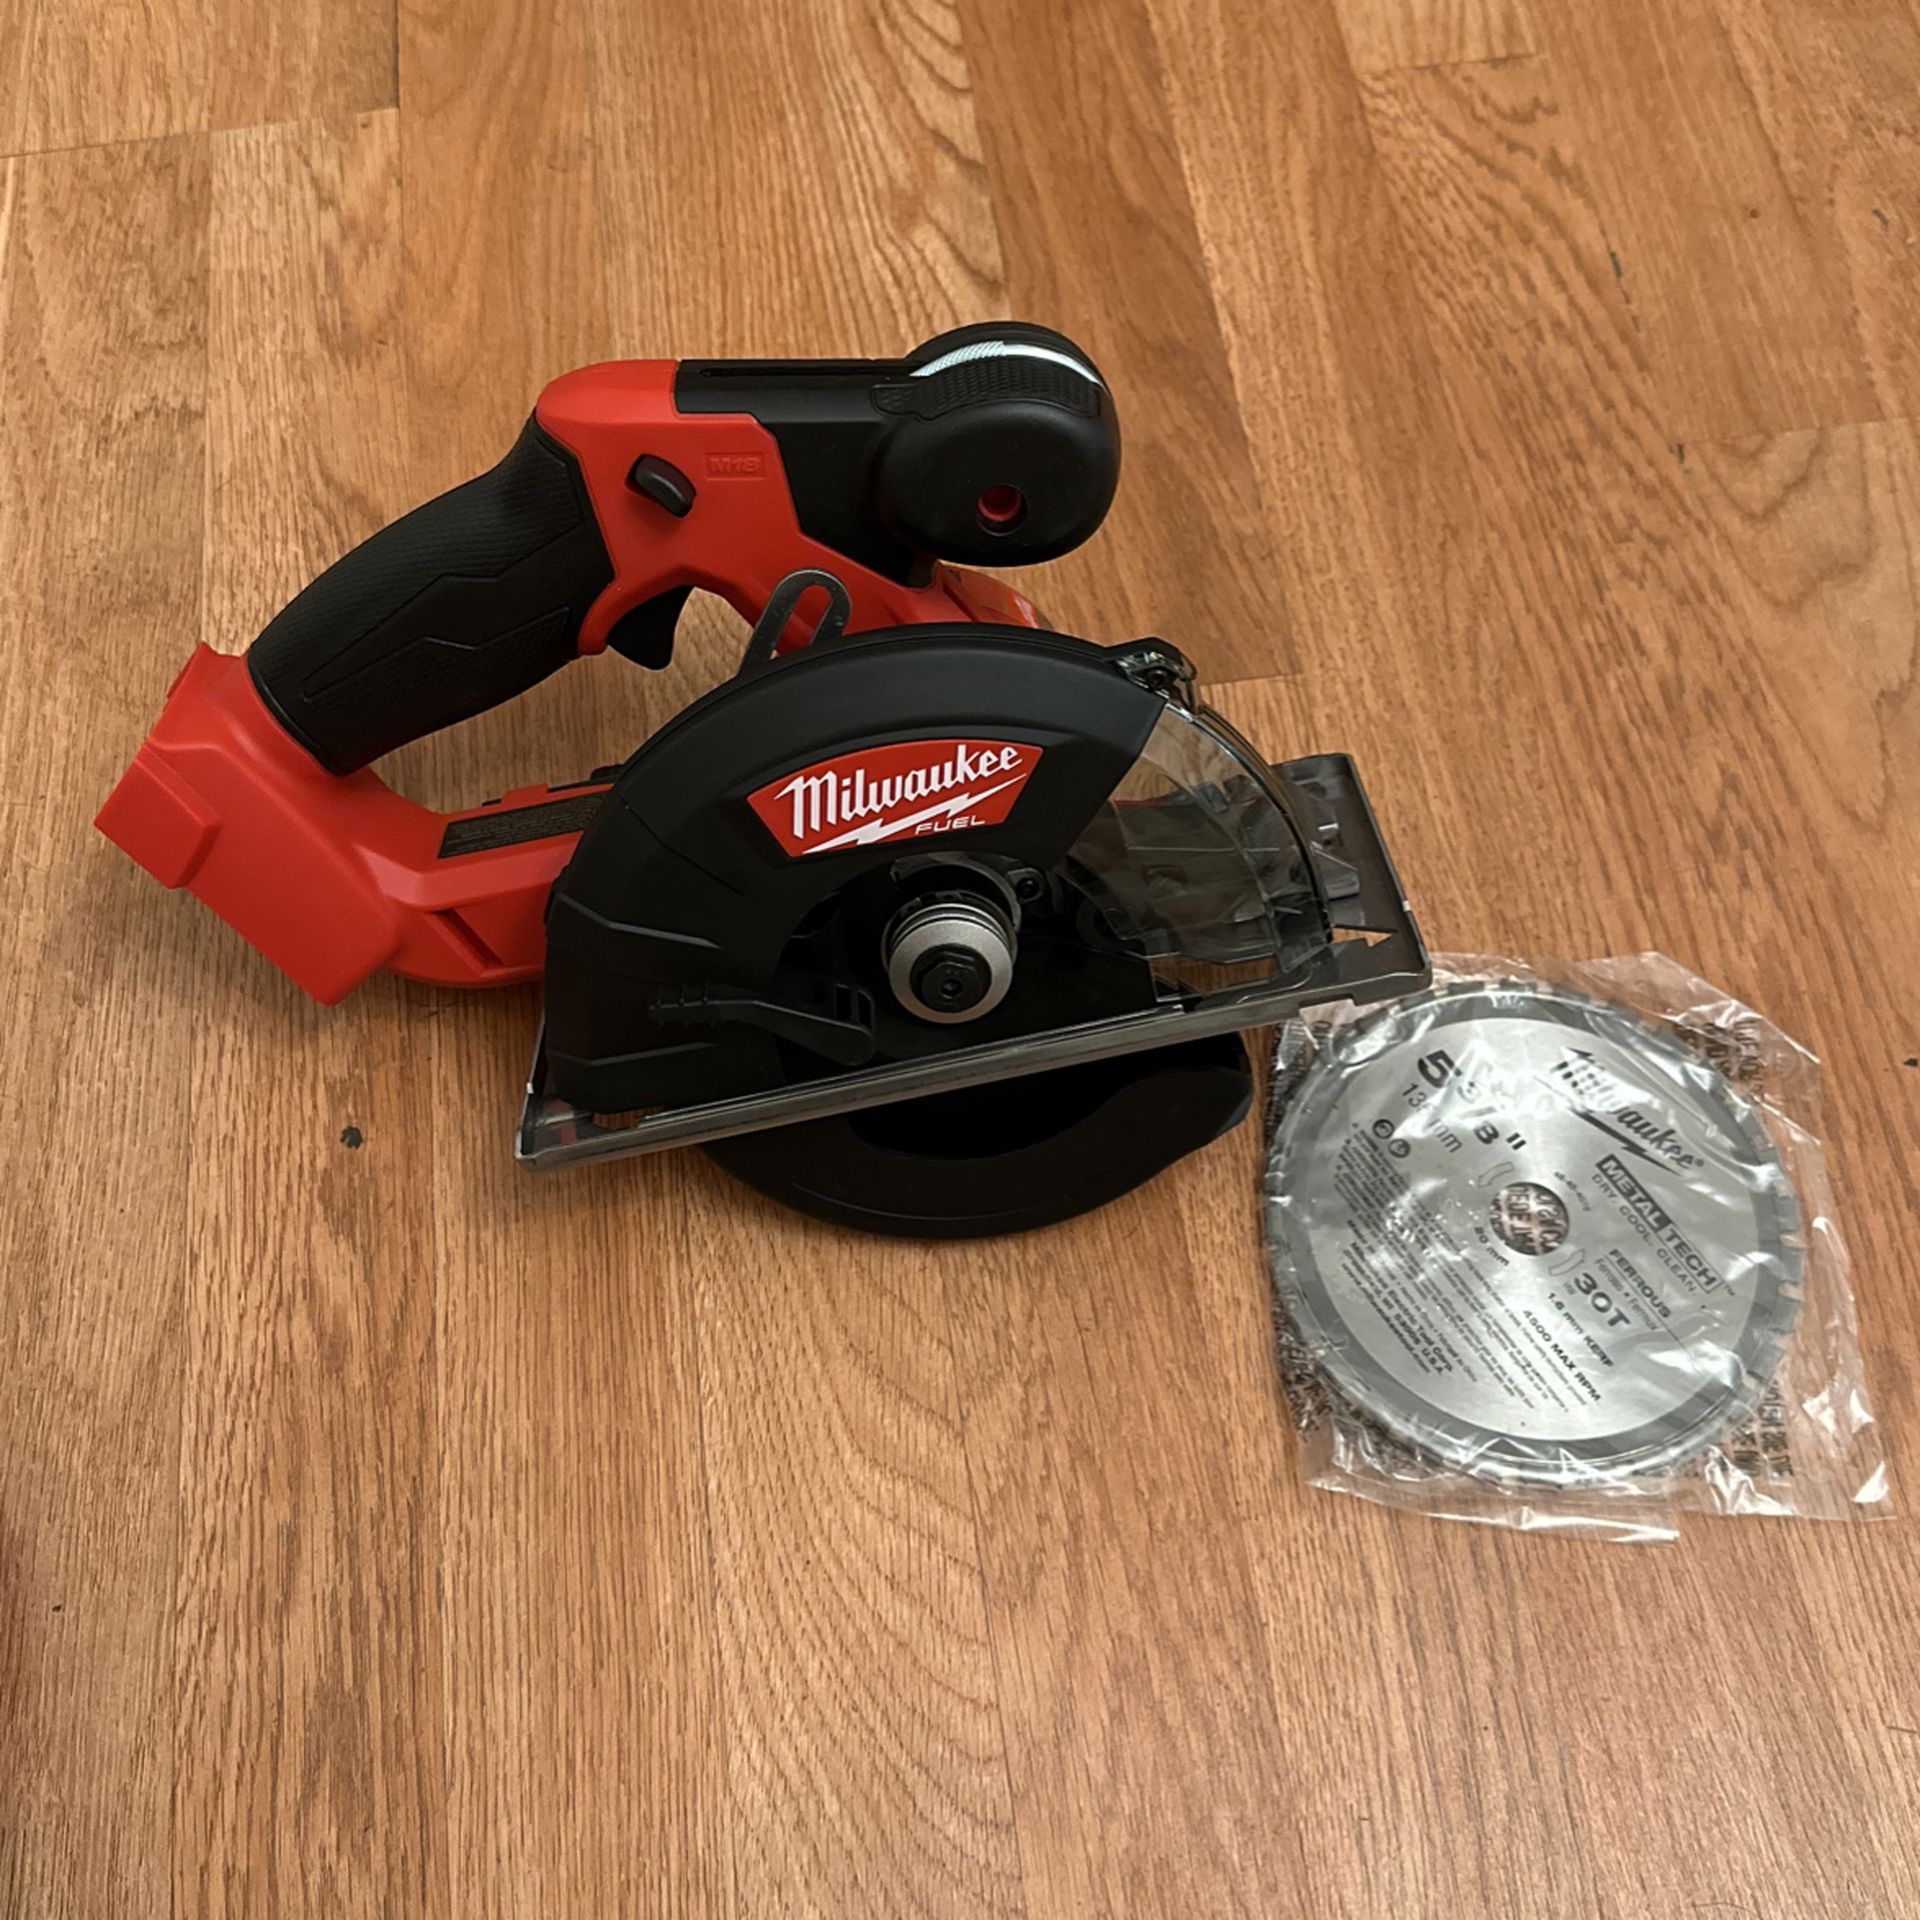 M18 FUEL 18-Volt Lithium-Ion Brushless Cordless Metal Cutting 5-3/8 in.  Circular Saw (Tool-Only) w/ Metal Saw Blade for Sale in San Diego, CA  OfferUp